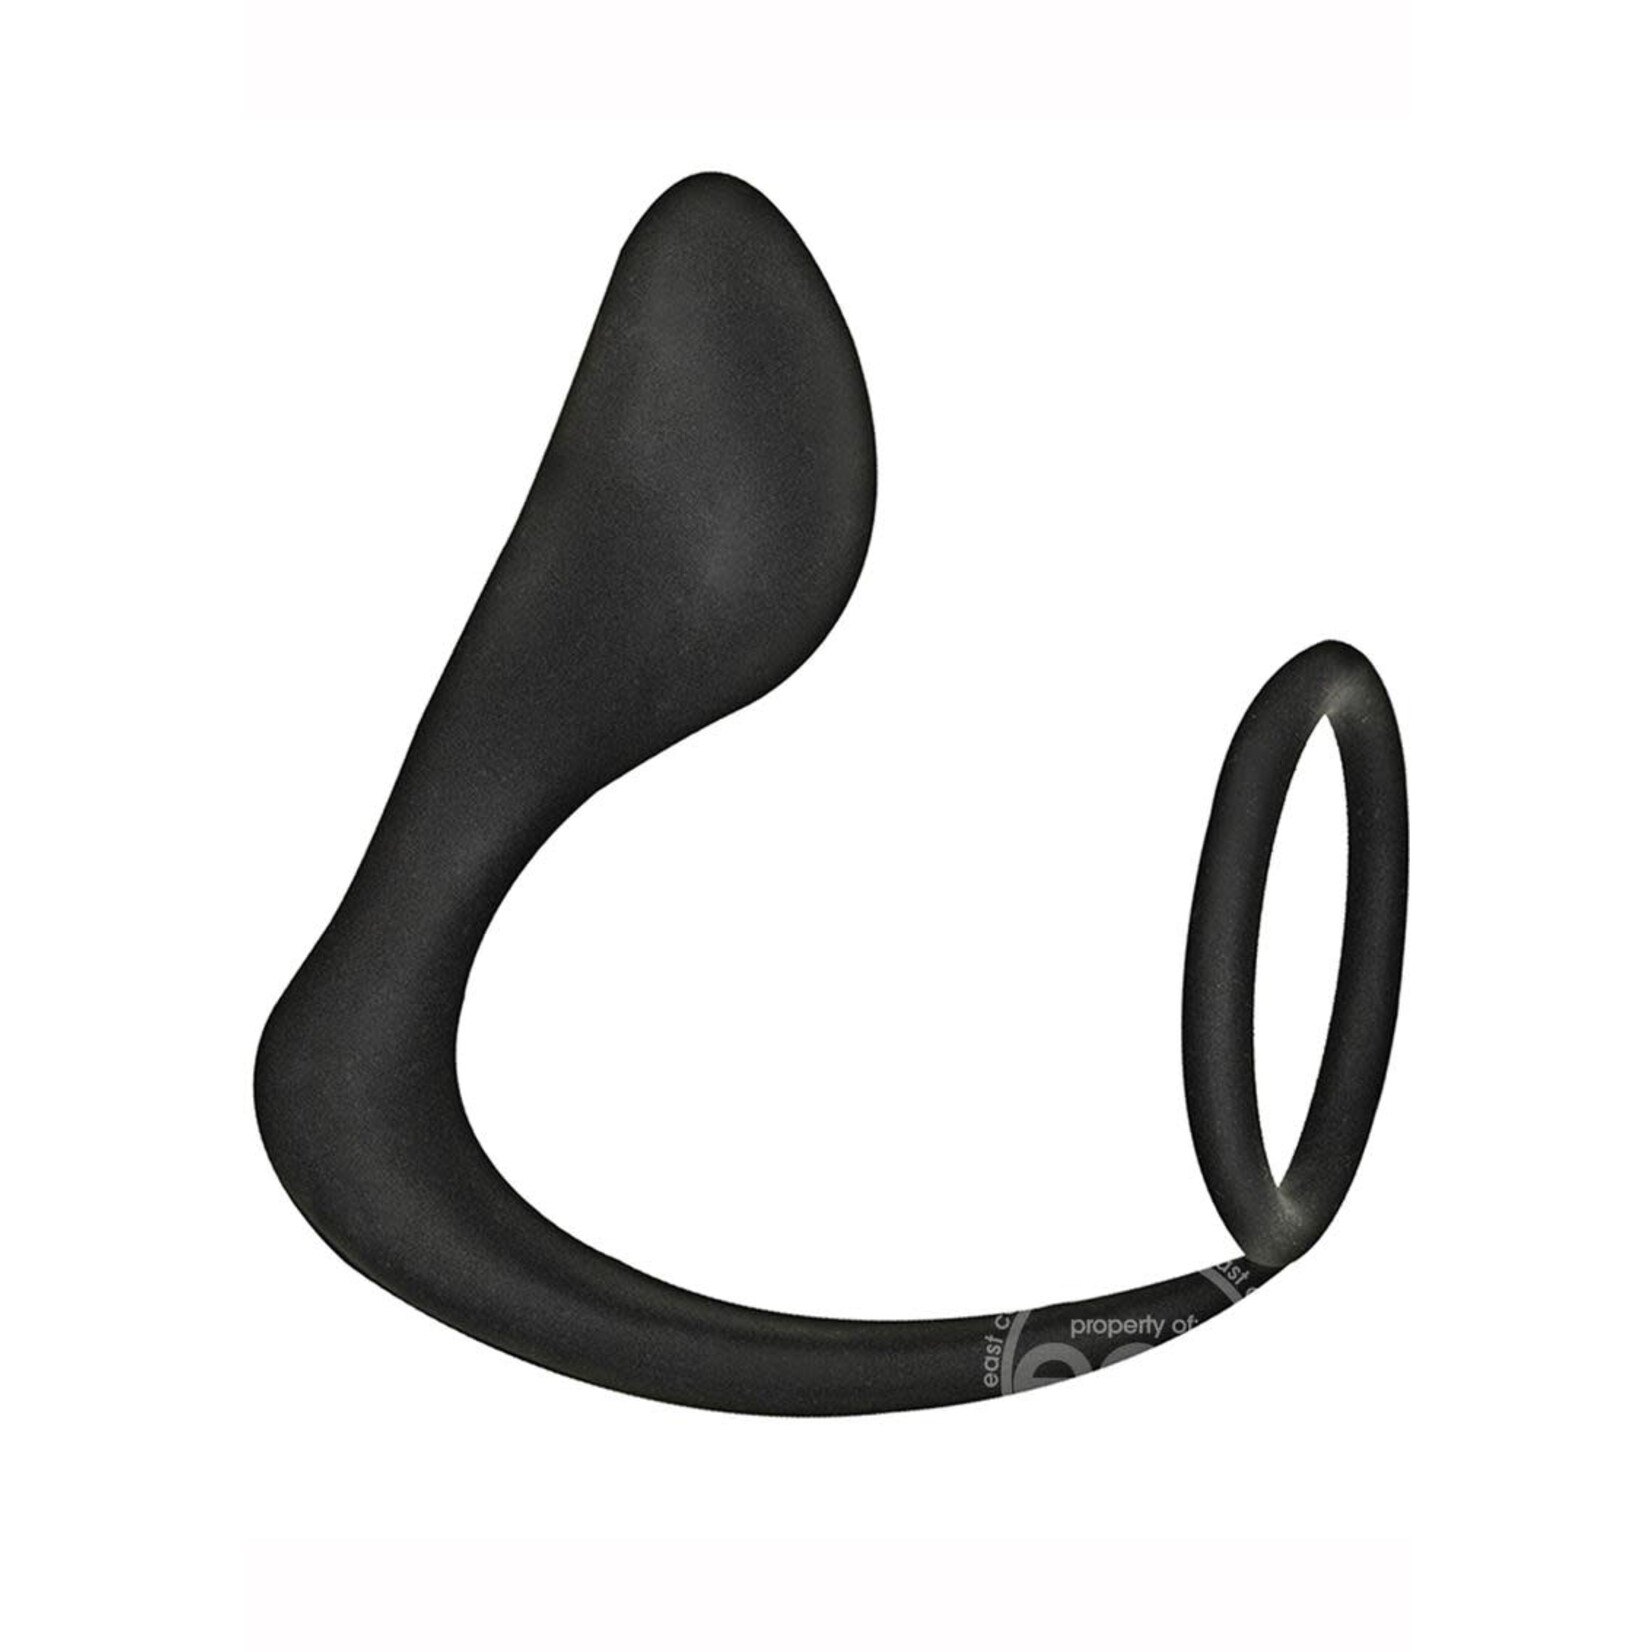 Commander Prostate Pleaser Silicone Cock Ring - Black